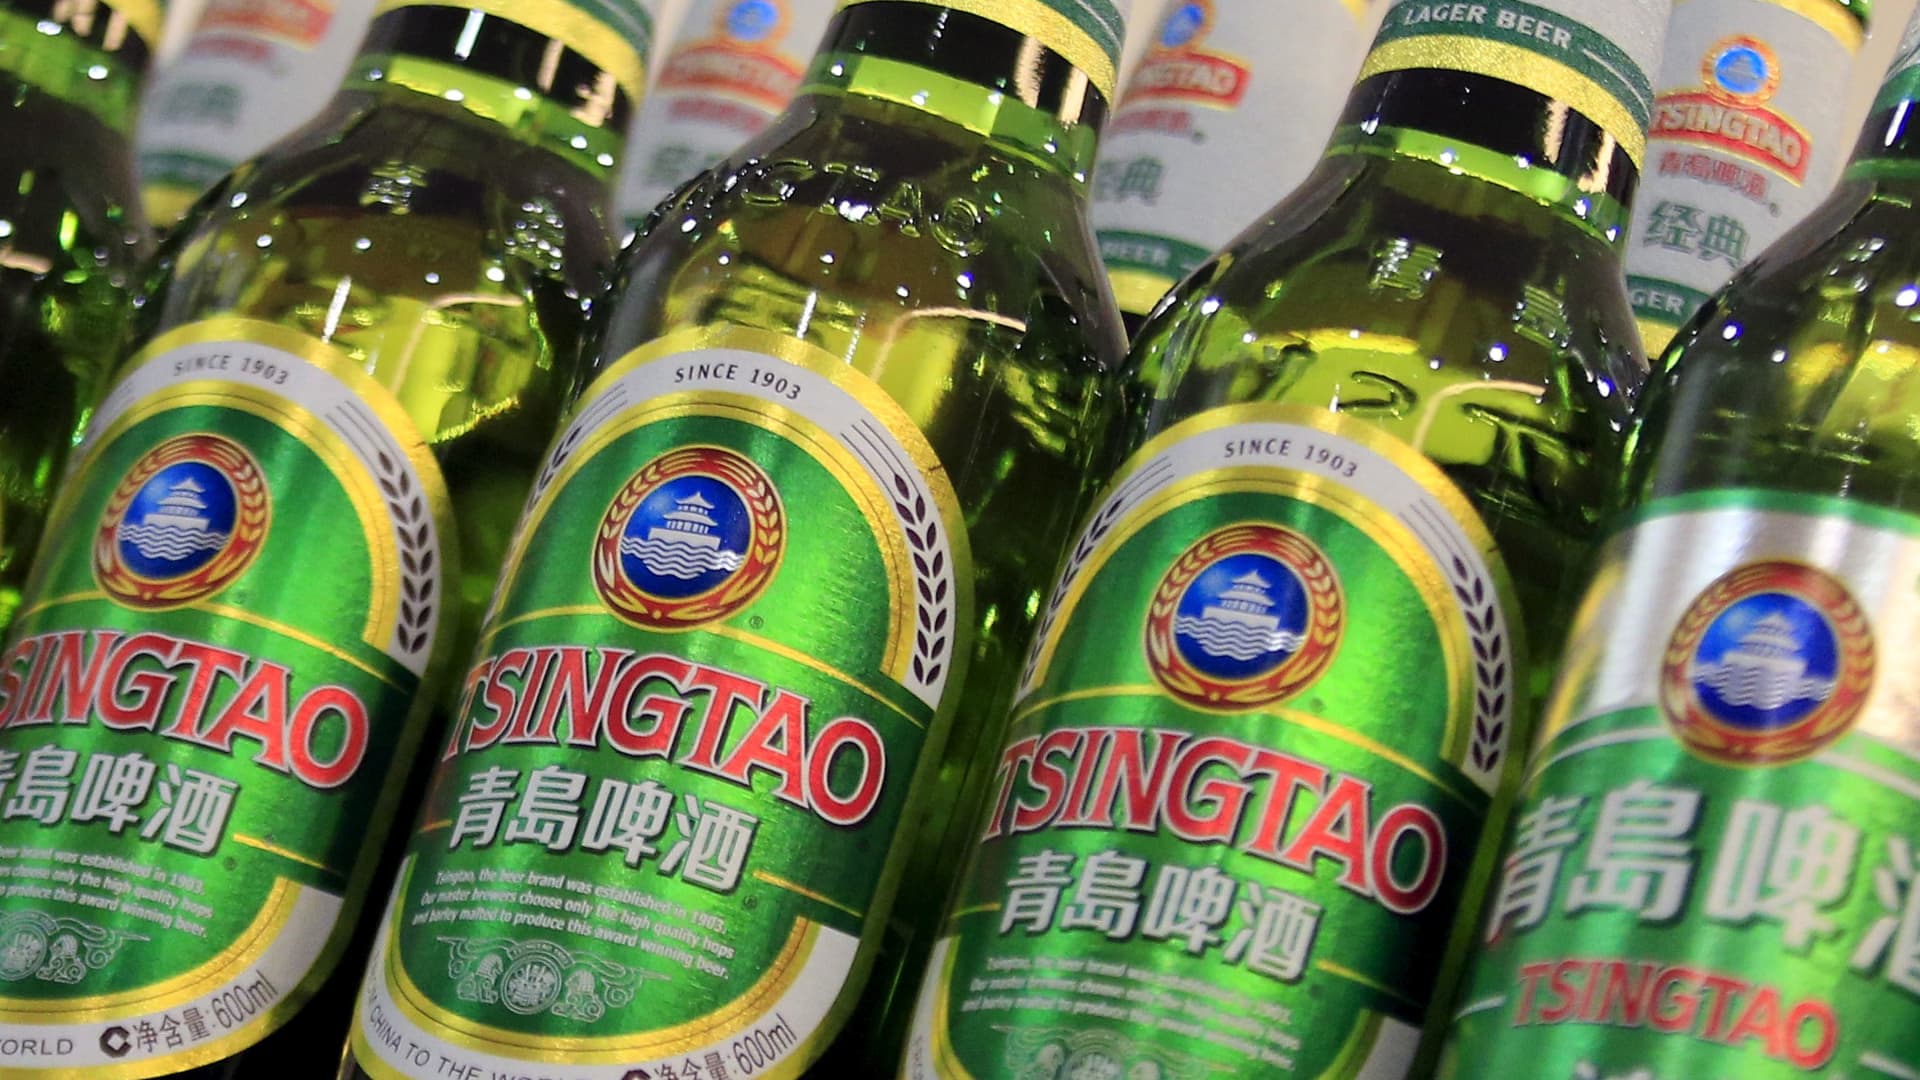 Tsingtao responds to viral video showing a Chinese beer worker urinating into a tank